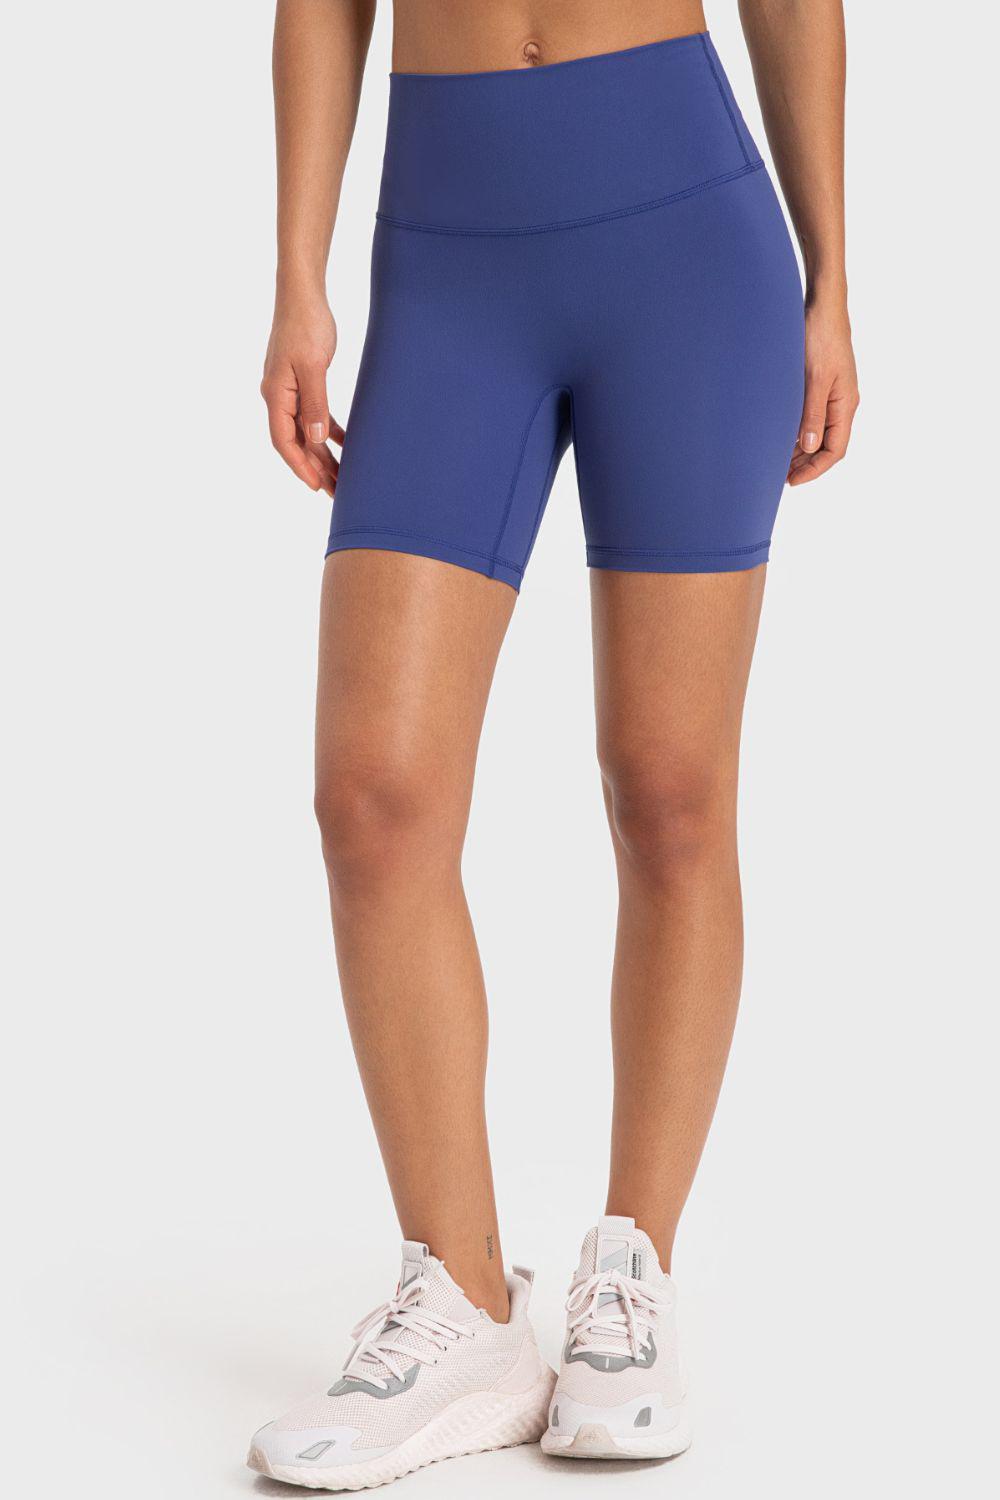 Staying Cozy Wide Waistband Biker Shorts BLUE ZONE PLANET